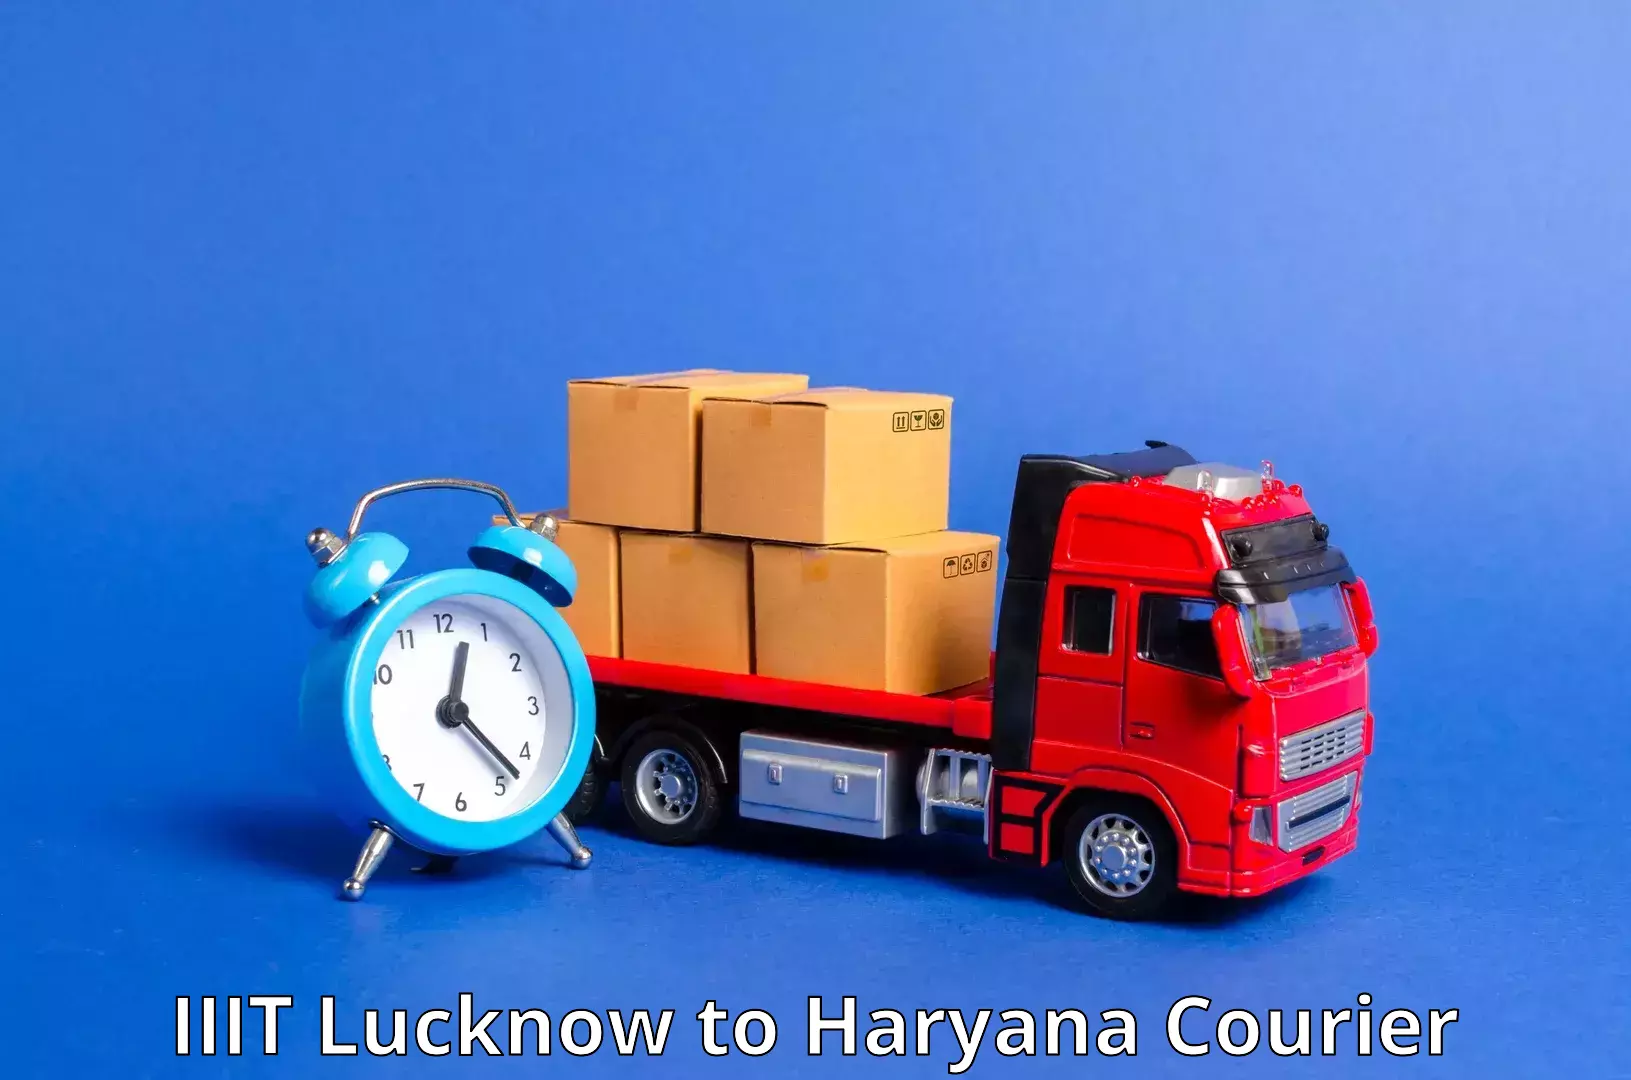 24-hour delivery options IIIT Lucknow to Bilaspur Haryana